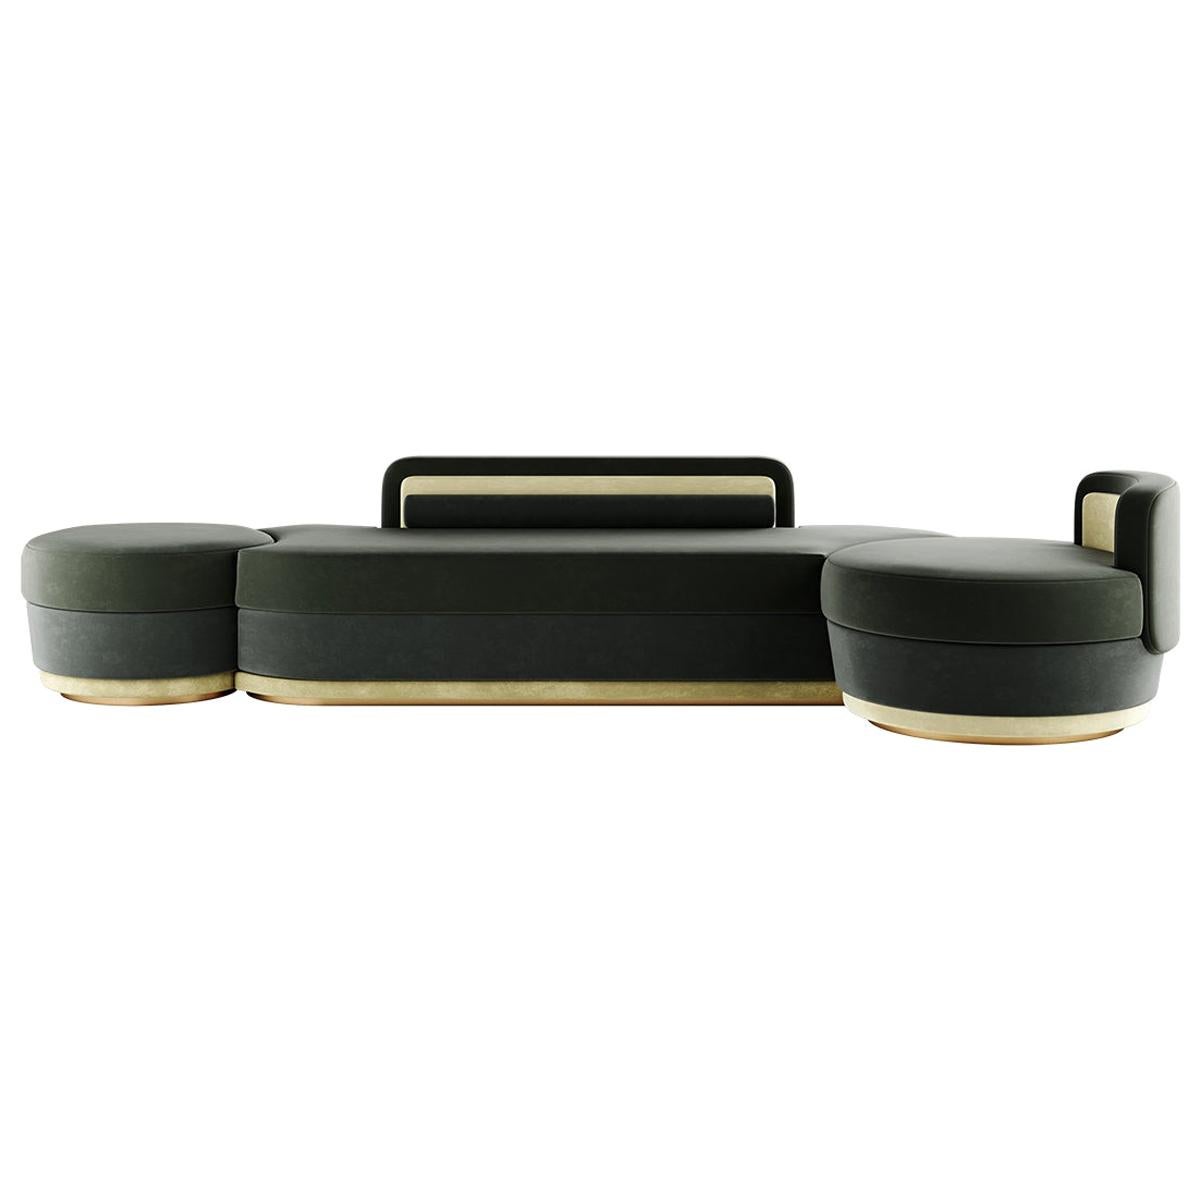 Modern Mid-Century Modular Curved Green Sofa with Side Tables and Gold Details